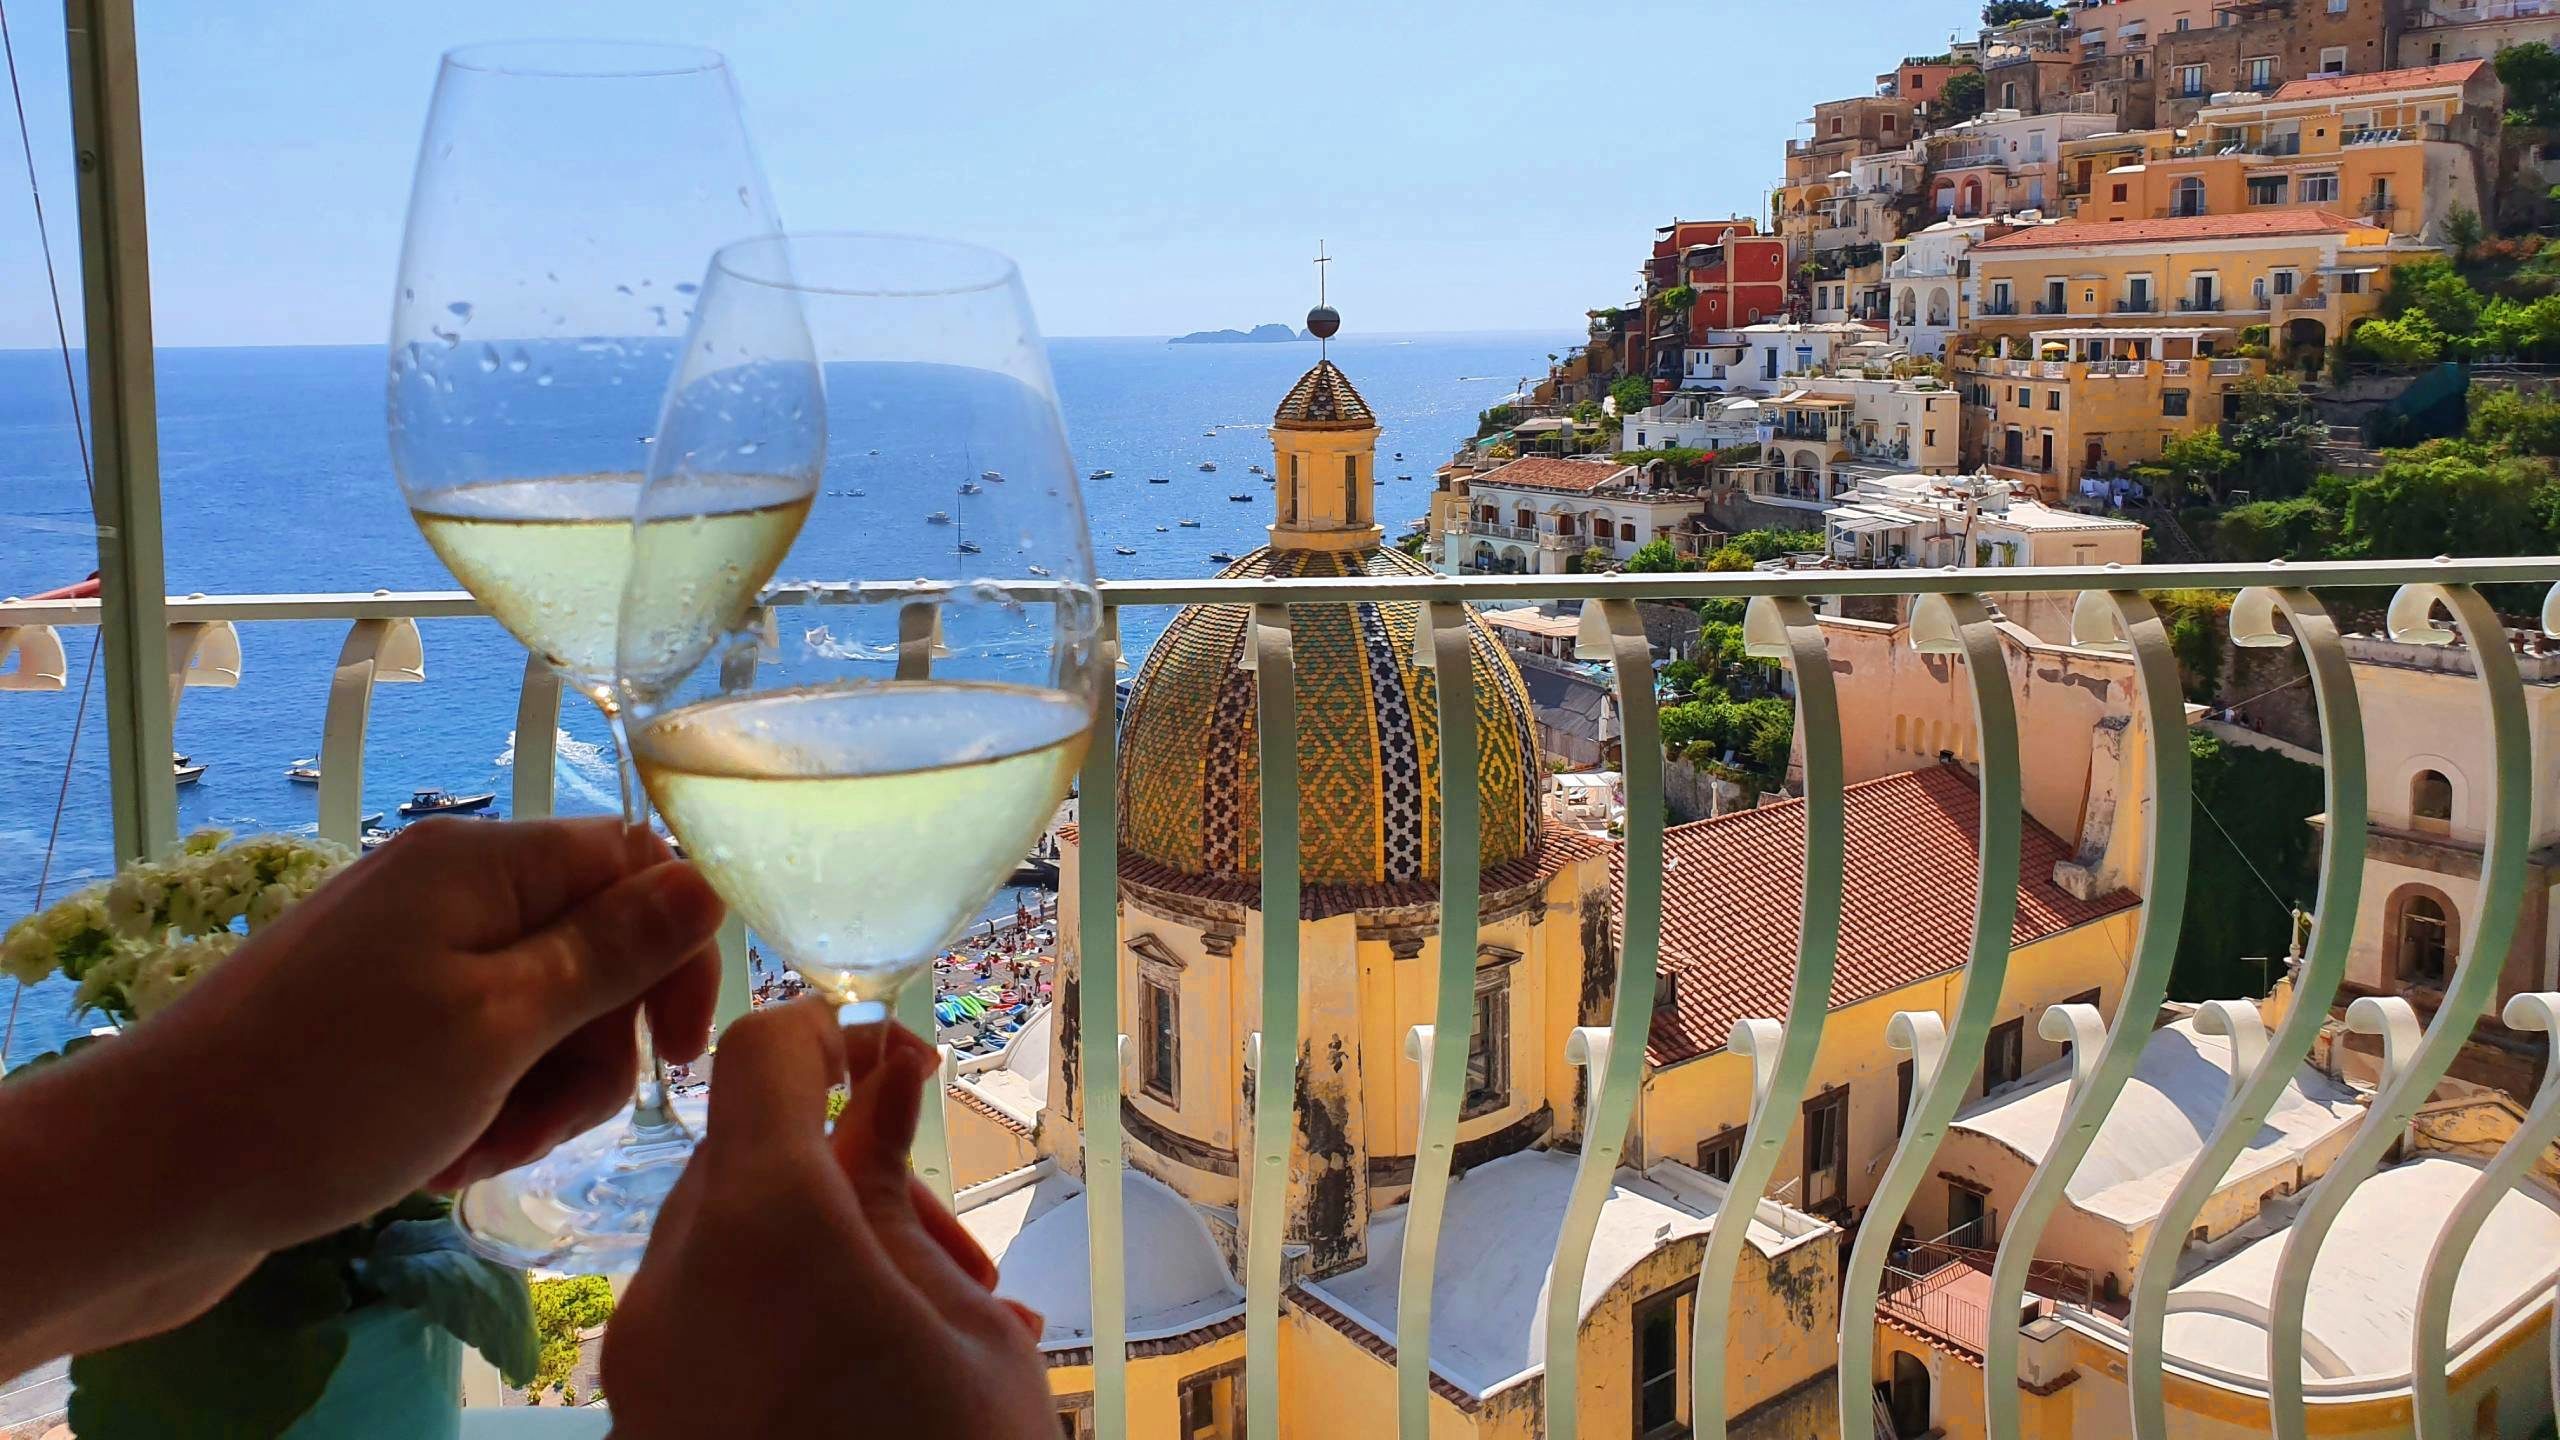 Two hands holding glasses of white wine on a balcony in Italy overlooking Positano town and views of the famous Amalfi Coast